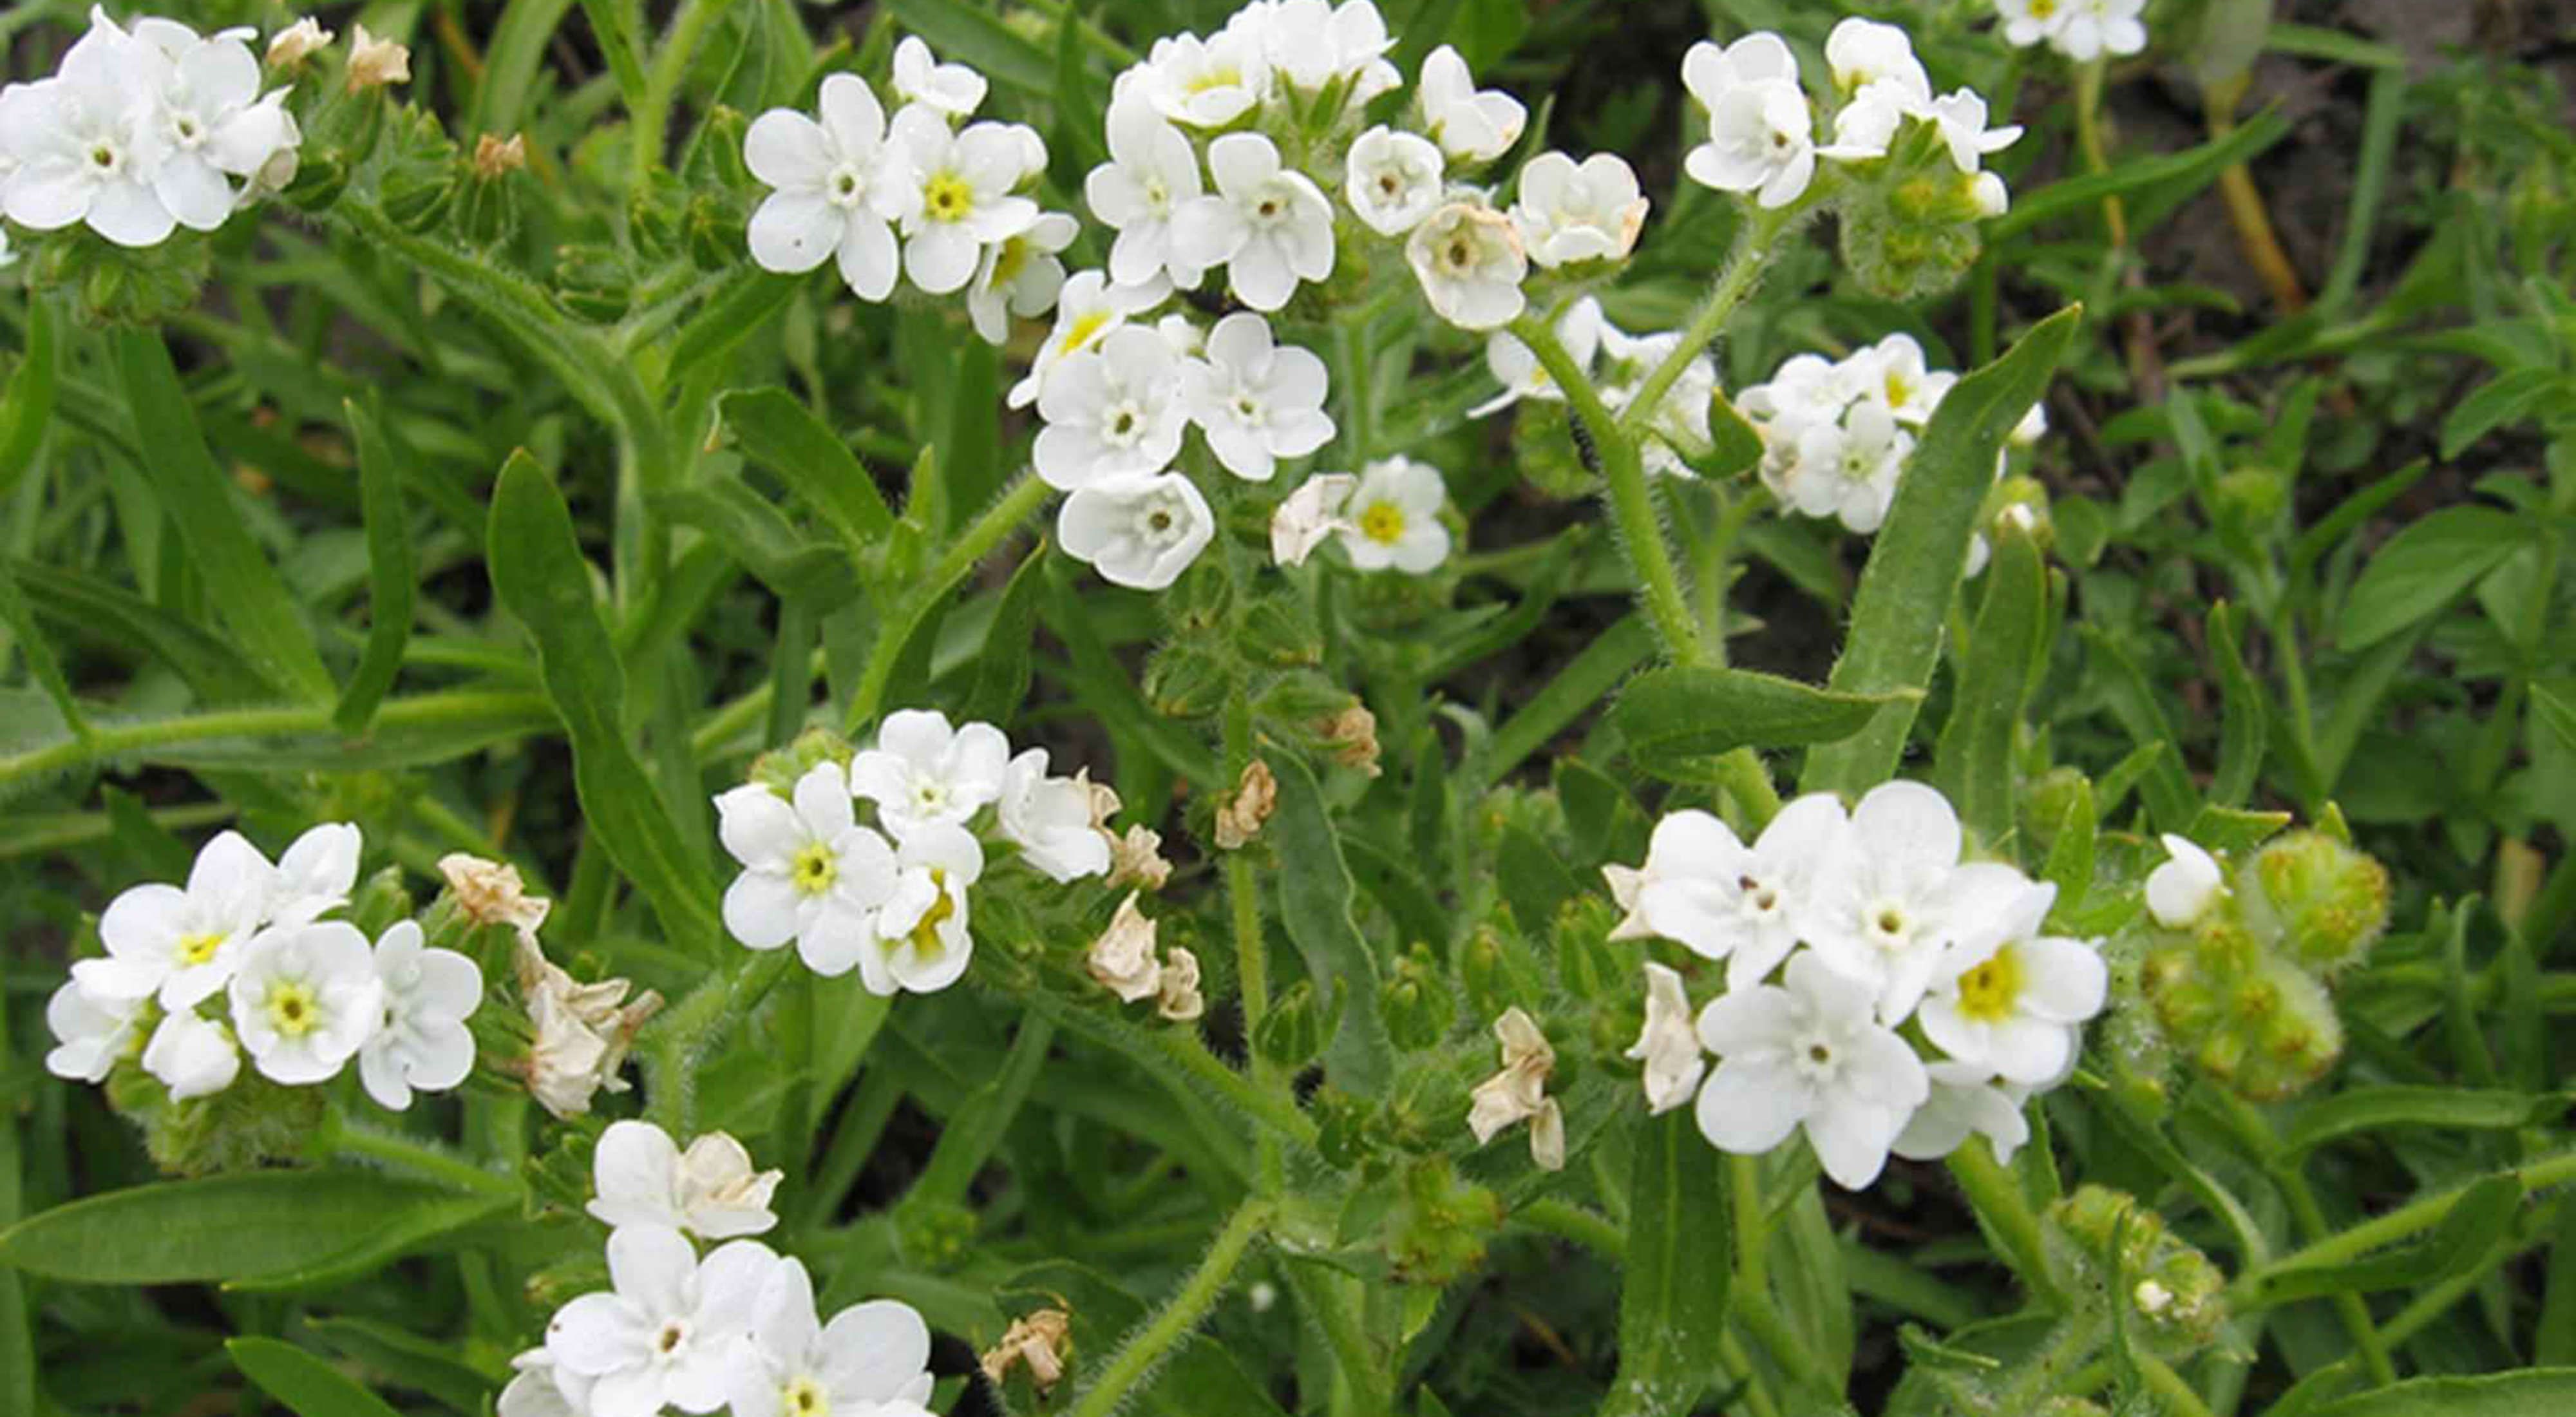 Small white flowers with rounded petals surrounded by green foliage.